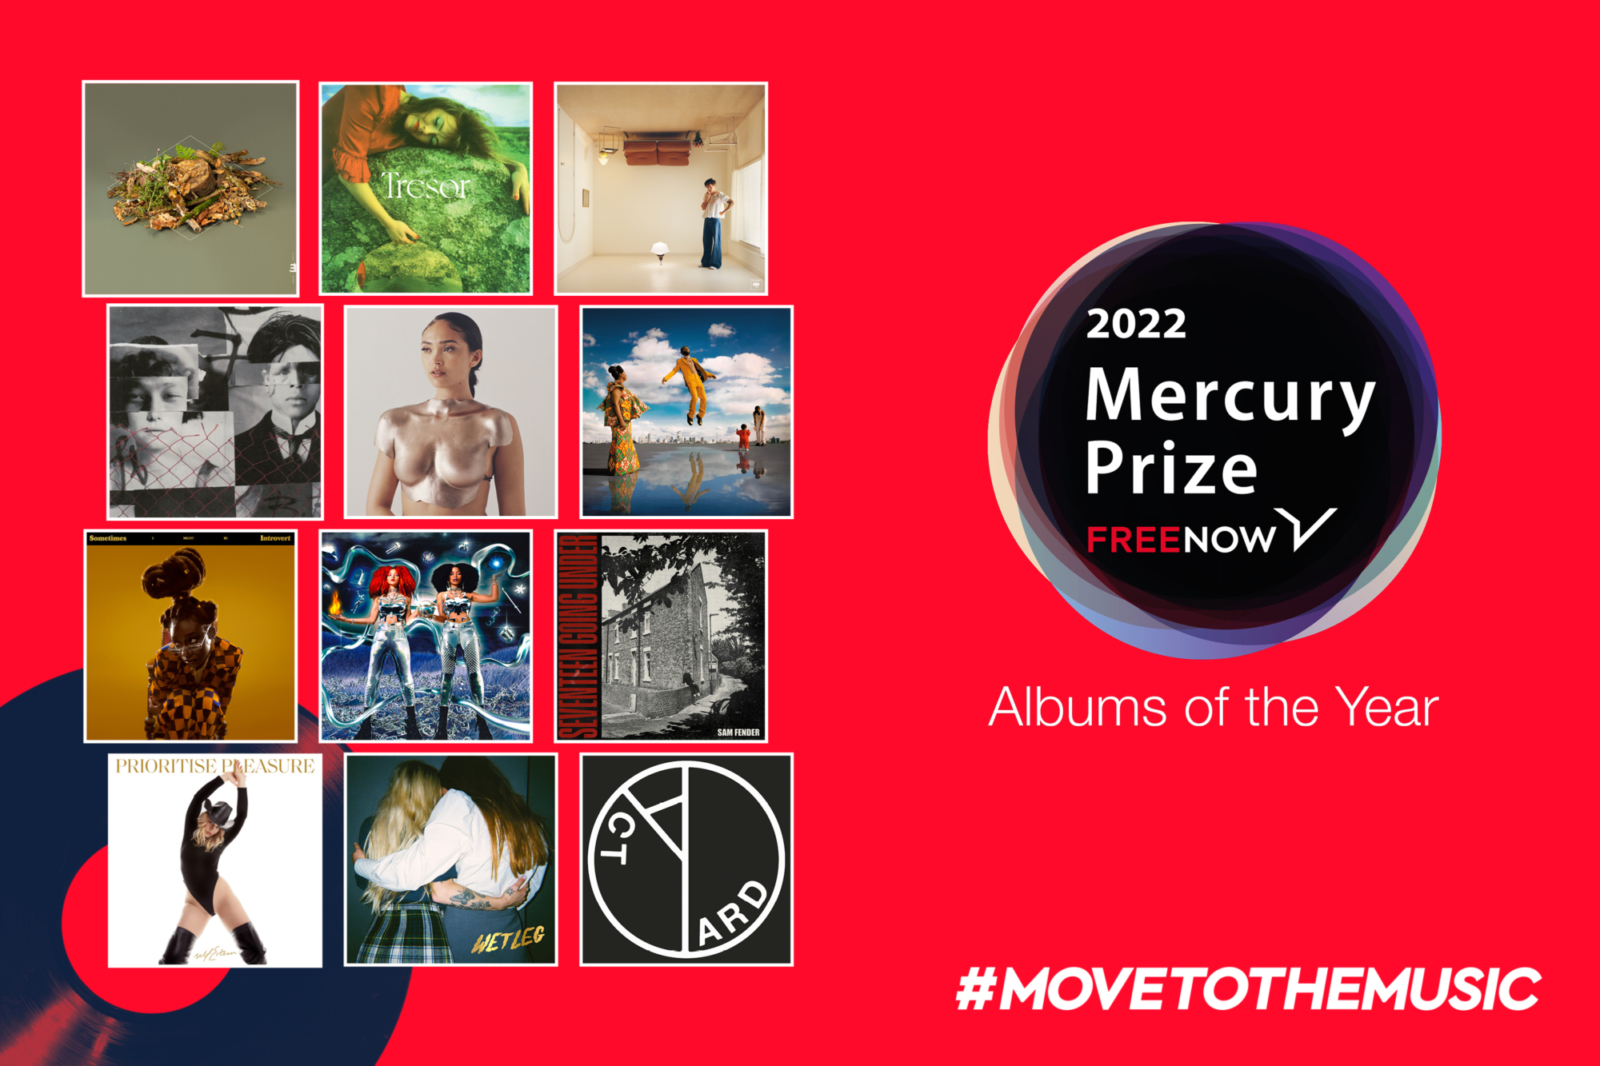 Your guide to the 12 albums shortlisted for the 2022 Mercury Prize with FREE NOW